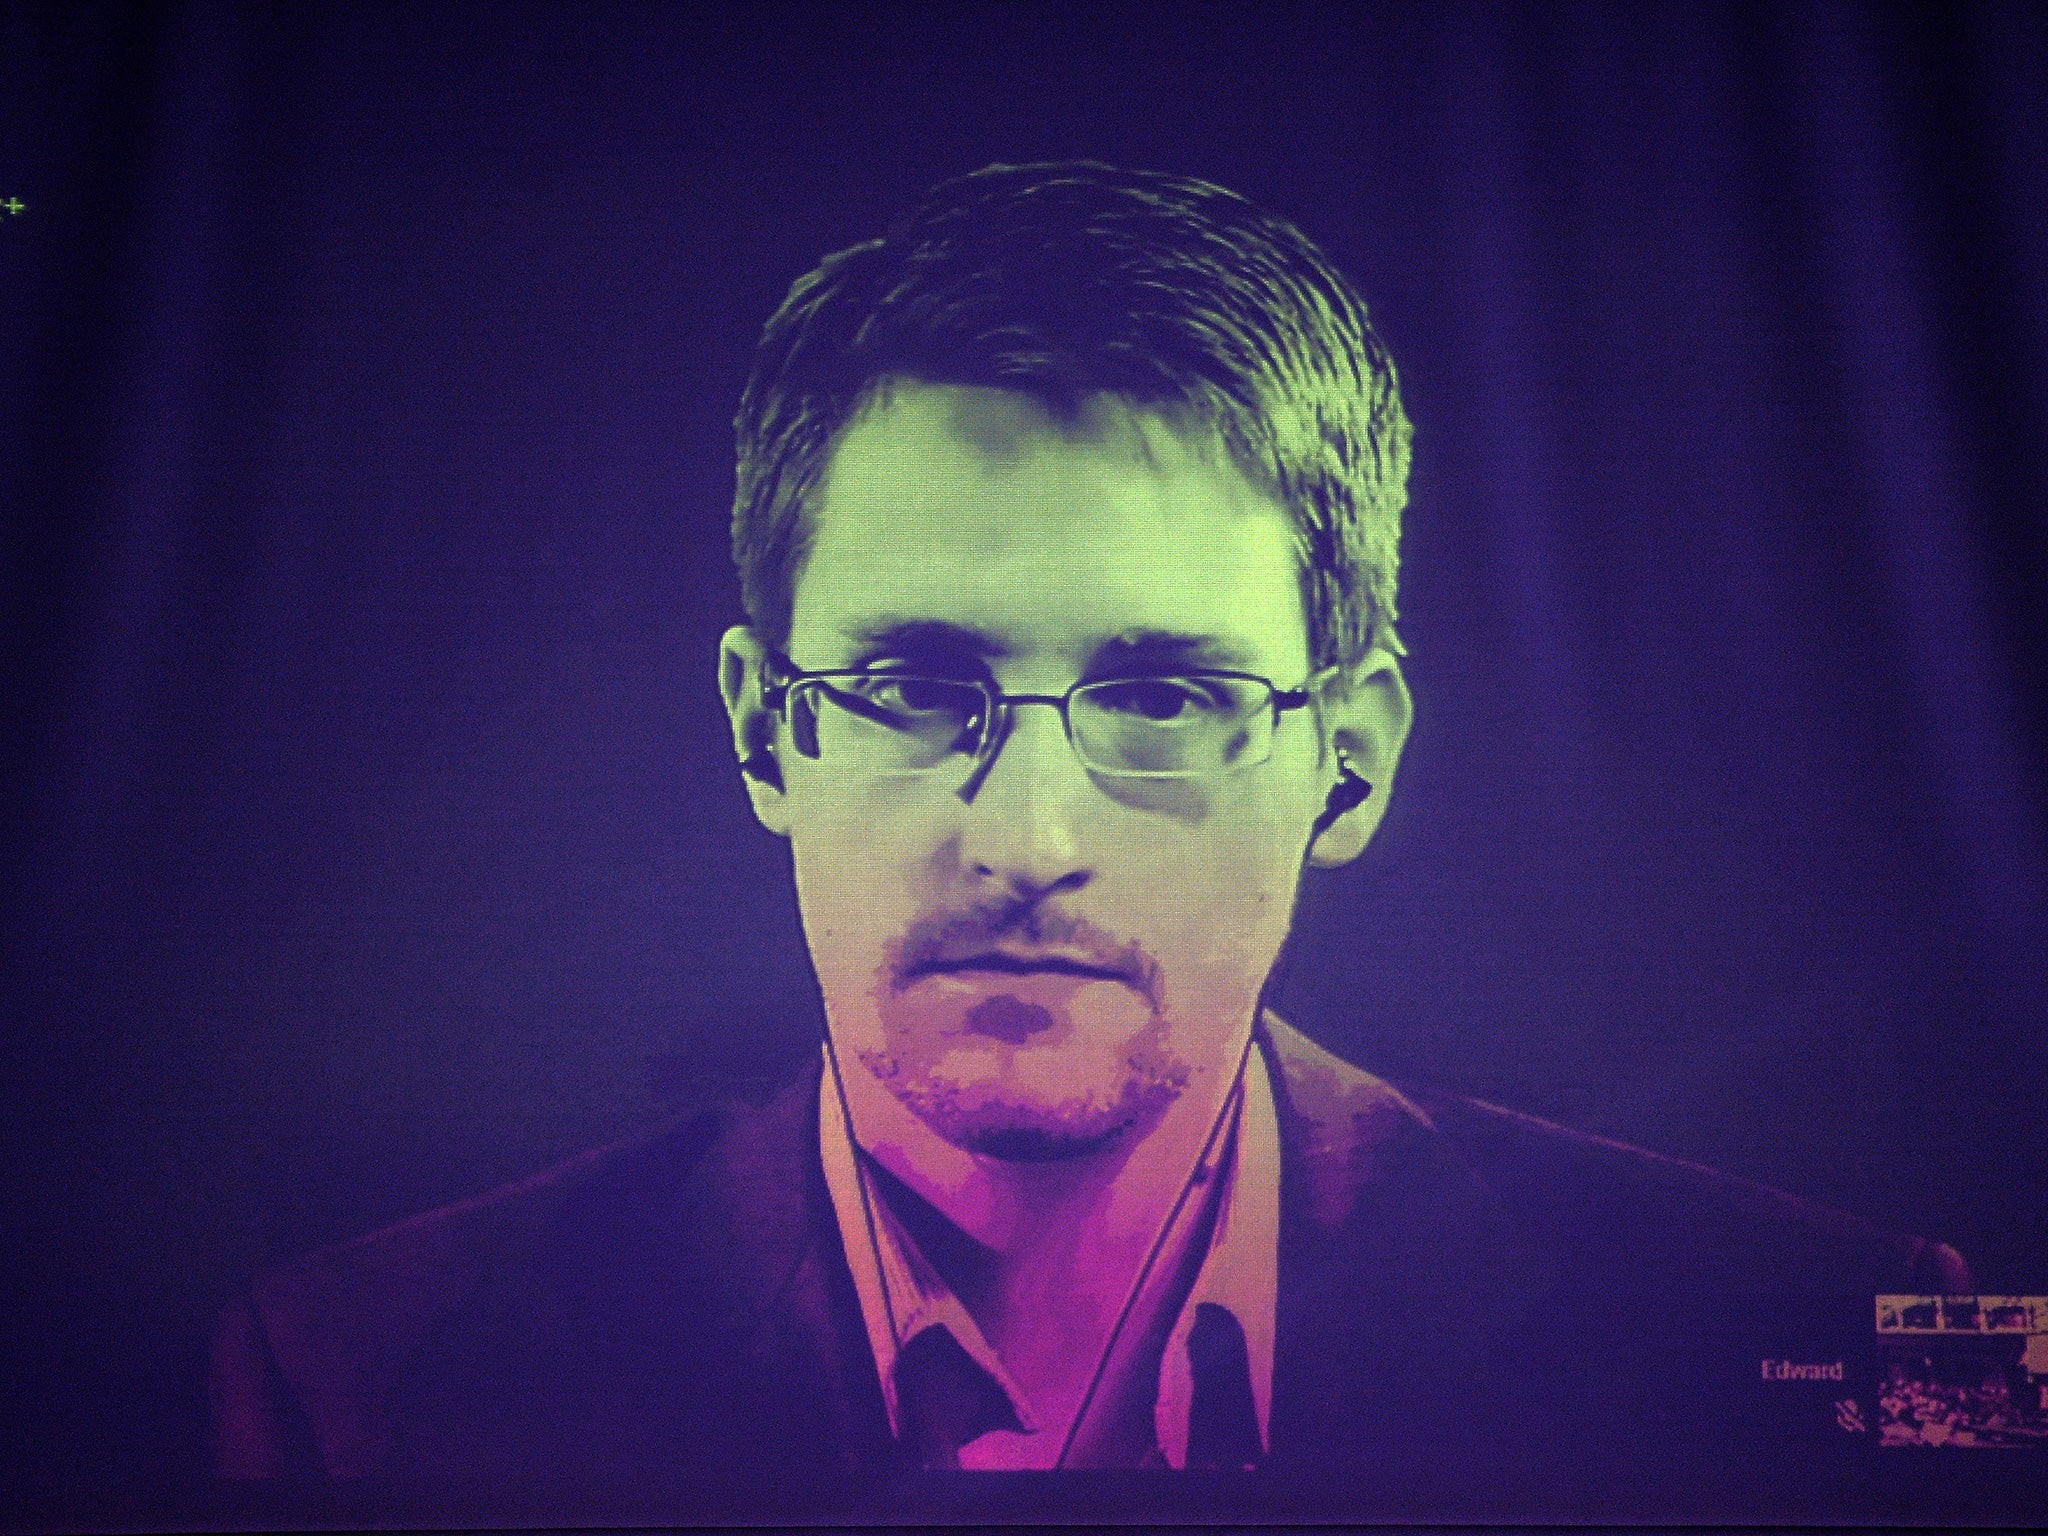 &#13;
Whistleblower Edward Snowden leaked NSA documents to the press in 2013&#13;